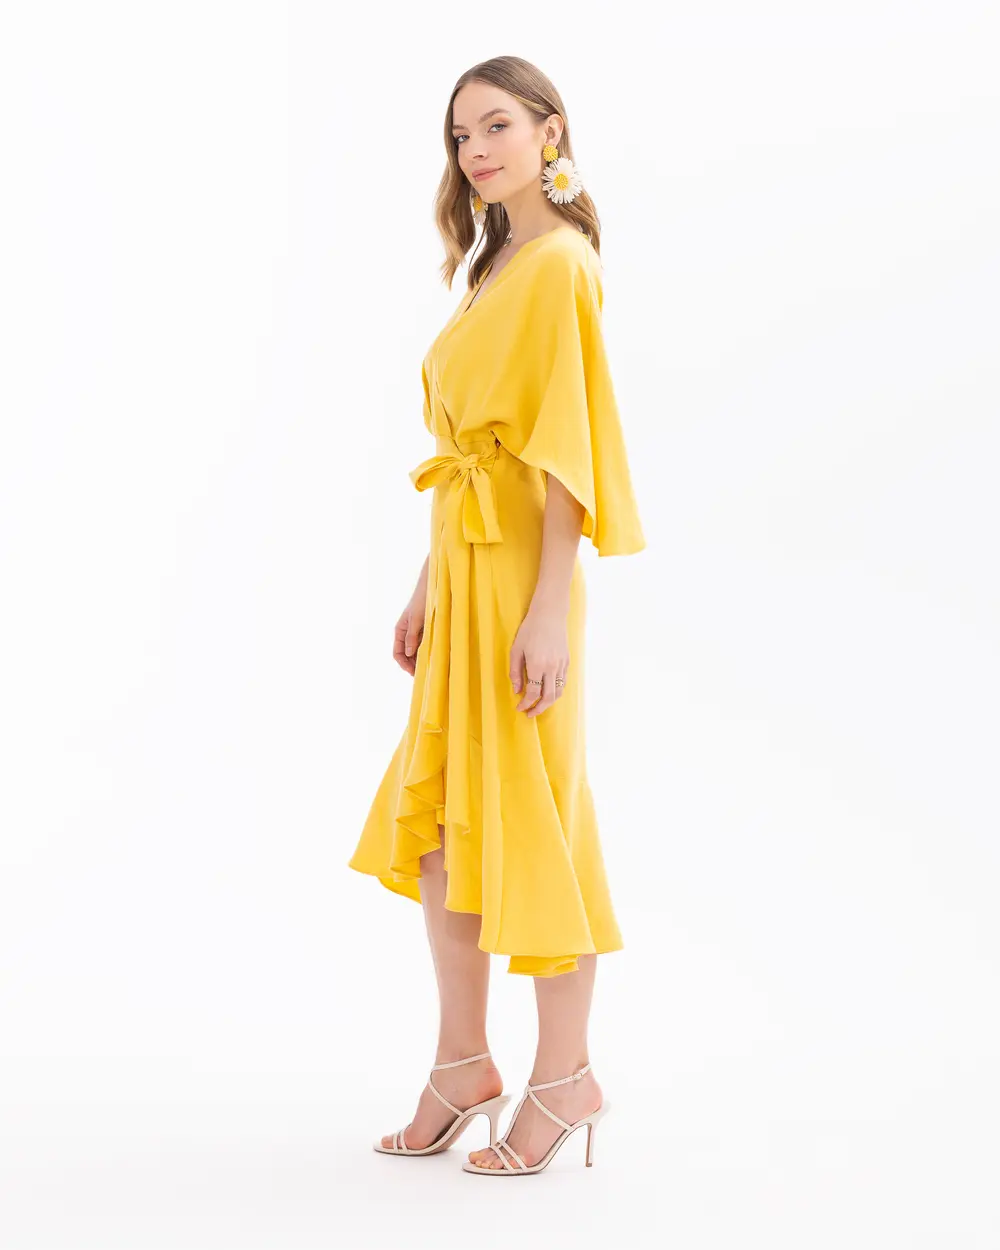 Double-breasted Collar Belted Bat Sleeve Dress